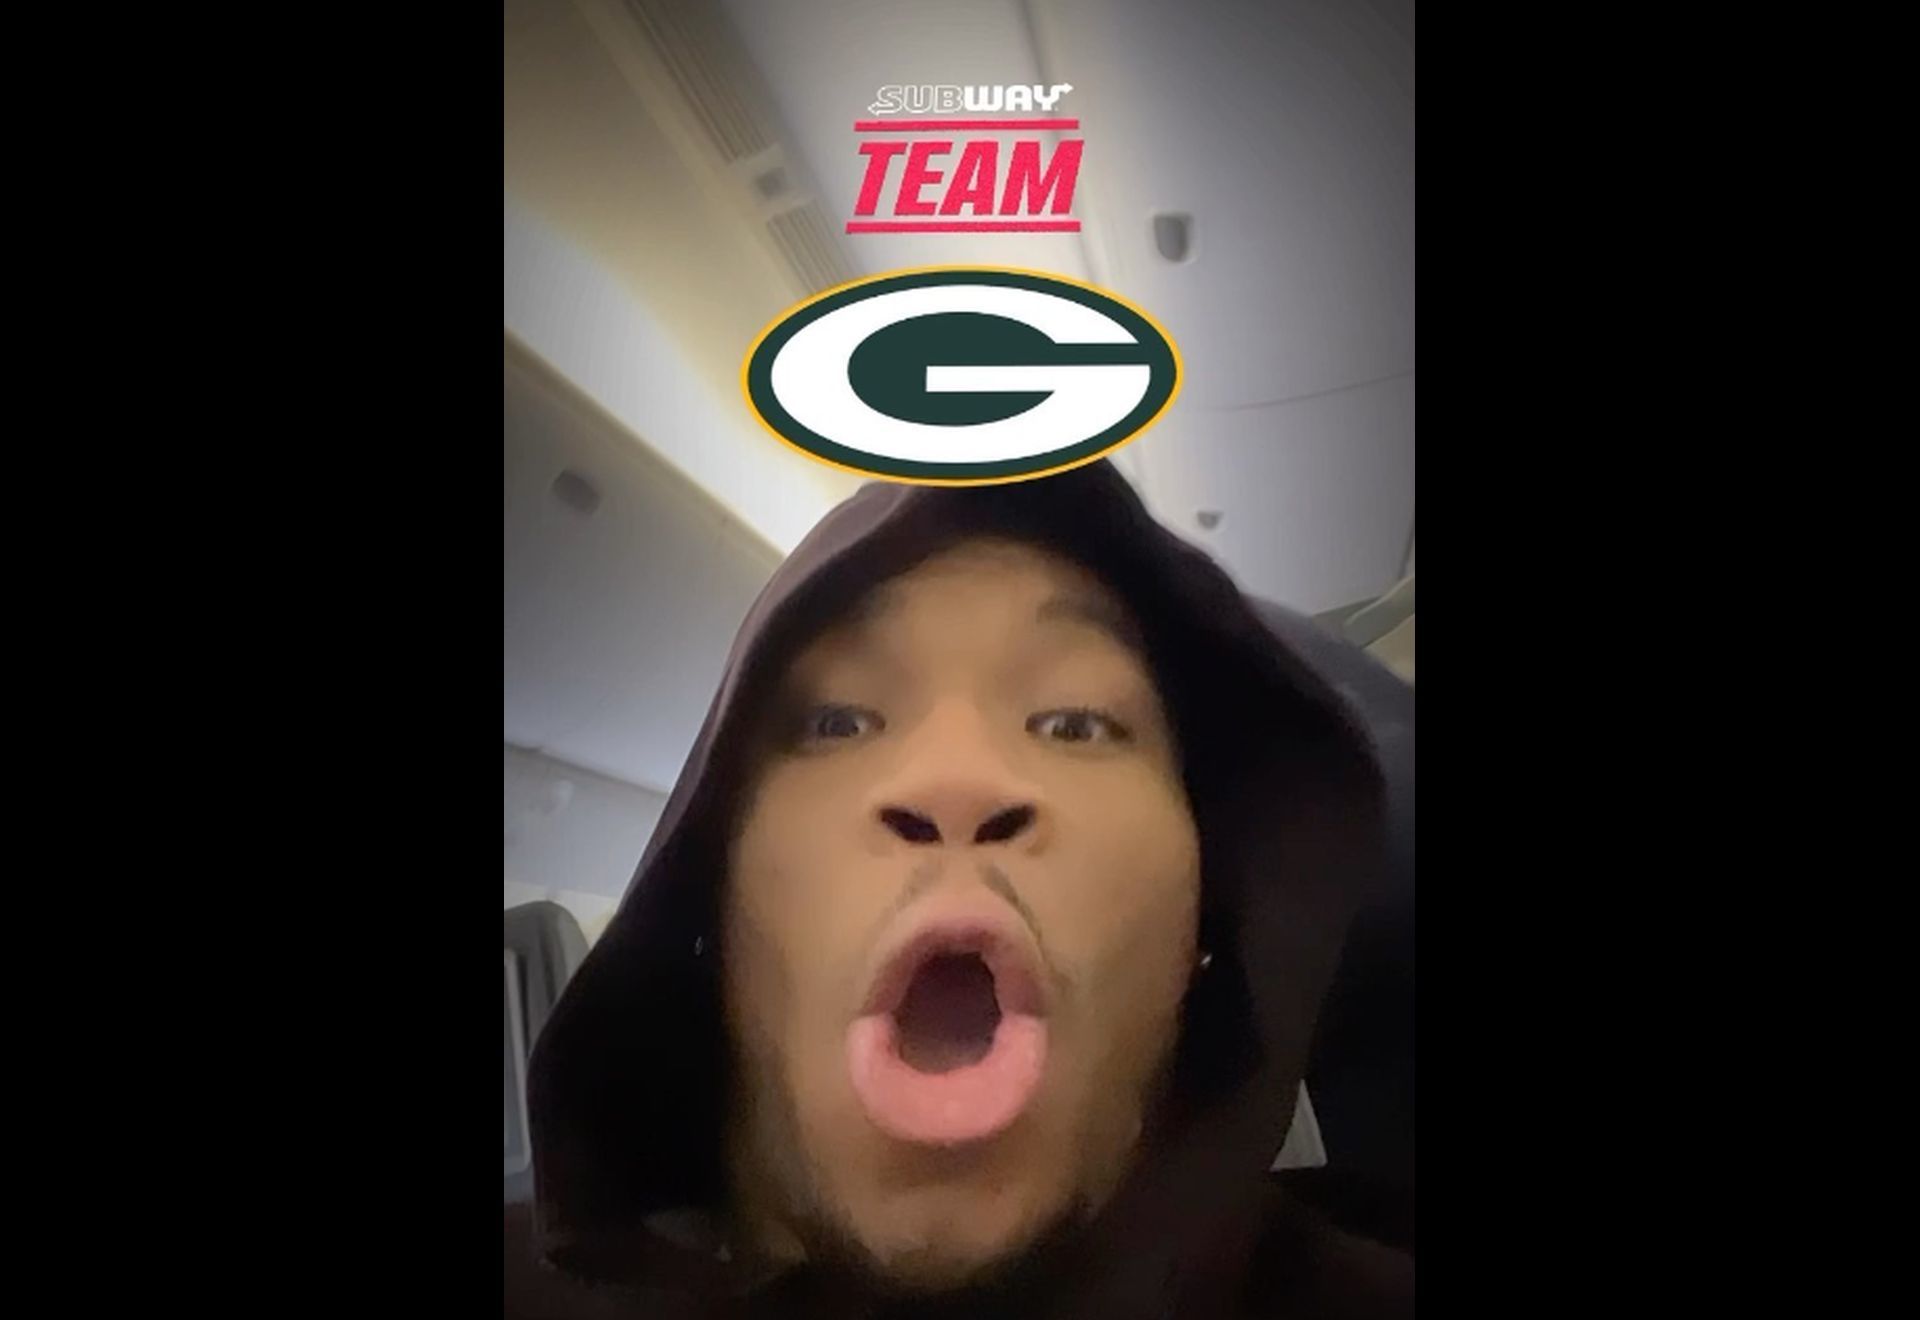 Giannis Antetokounmpo is bored and wants to try out as QB for the Green Bay Packers